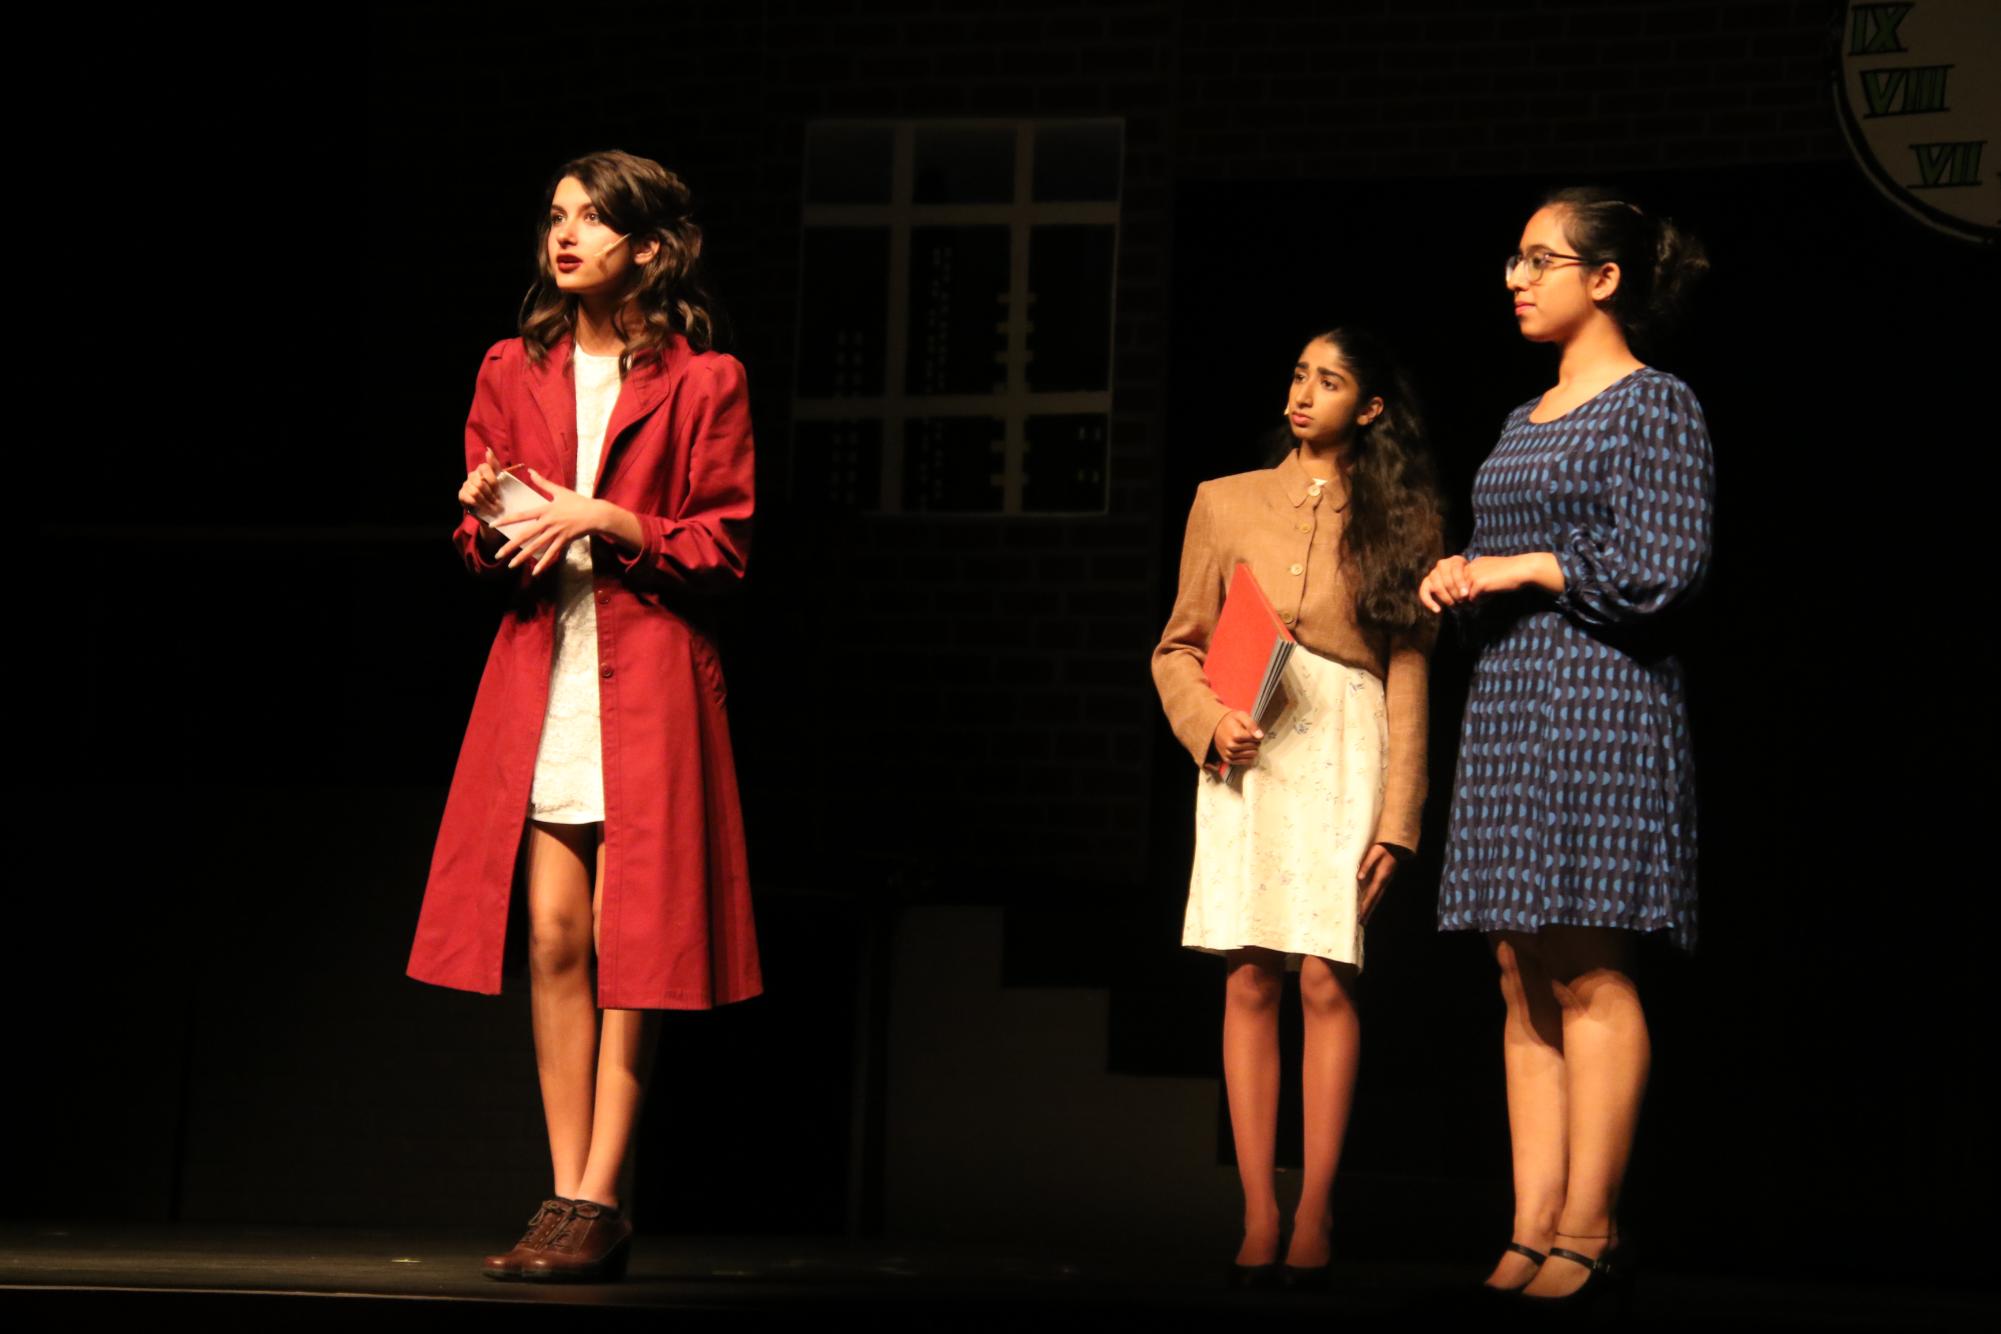 DVHS+Drama+brings+intrigue+and+emotion+with+%E2%80%9CRadium+Girls%E2%80%9D